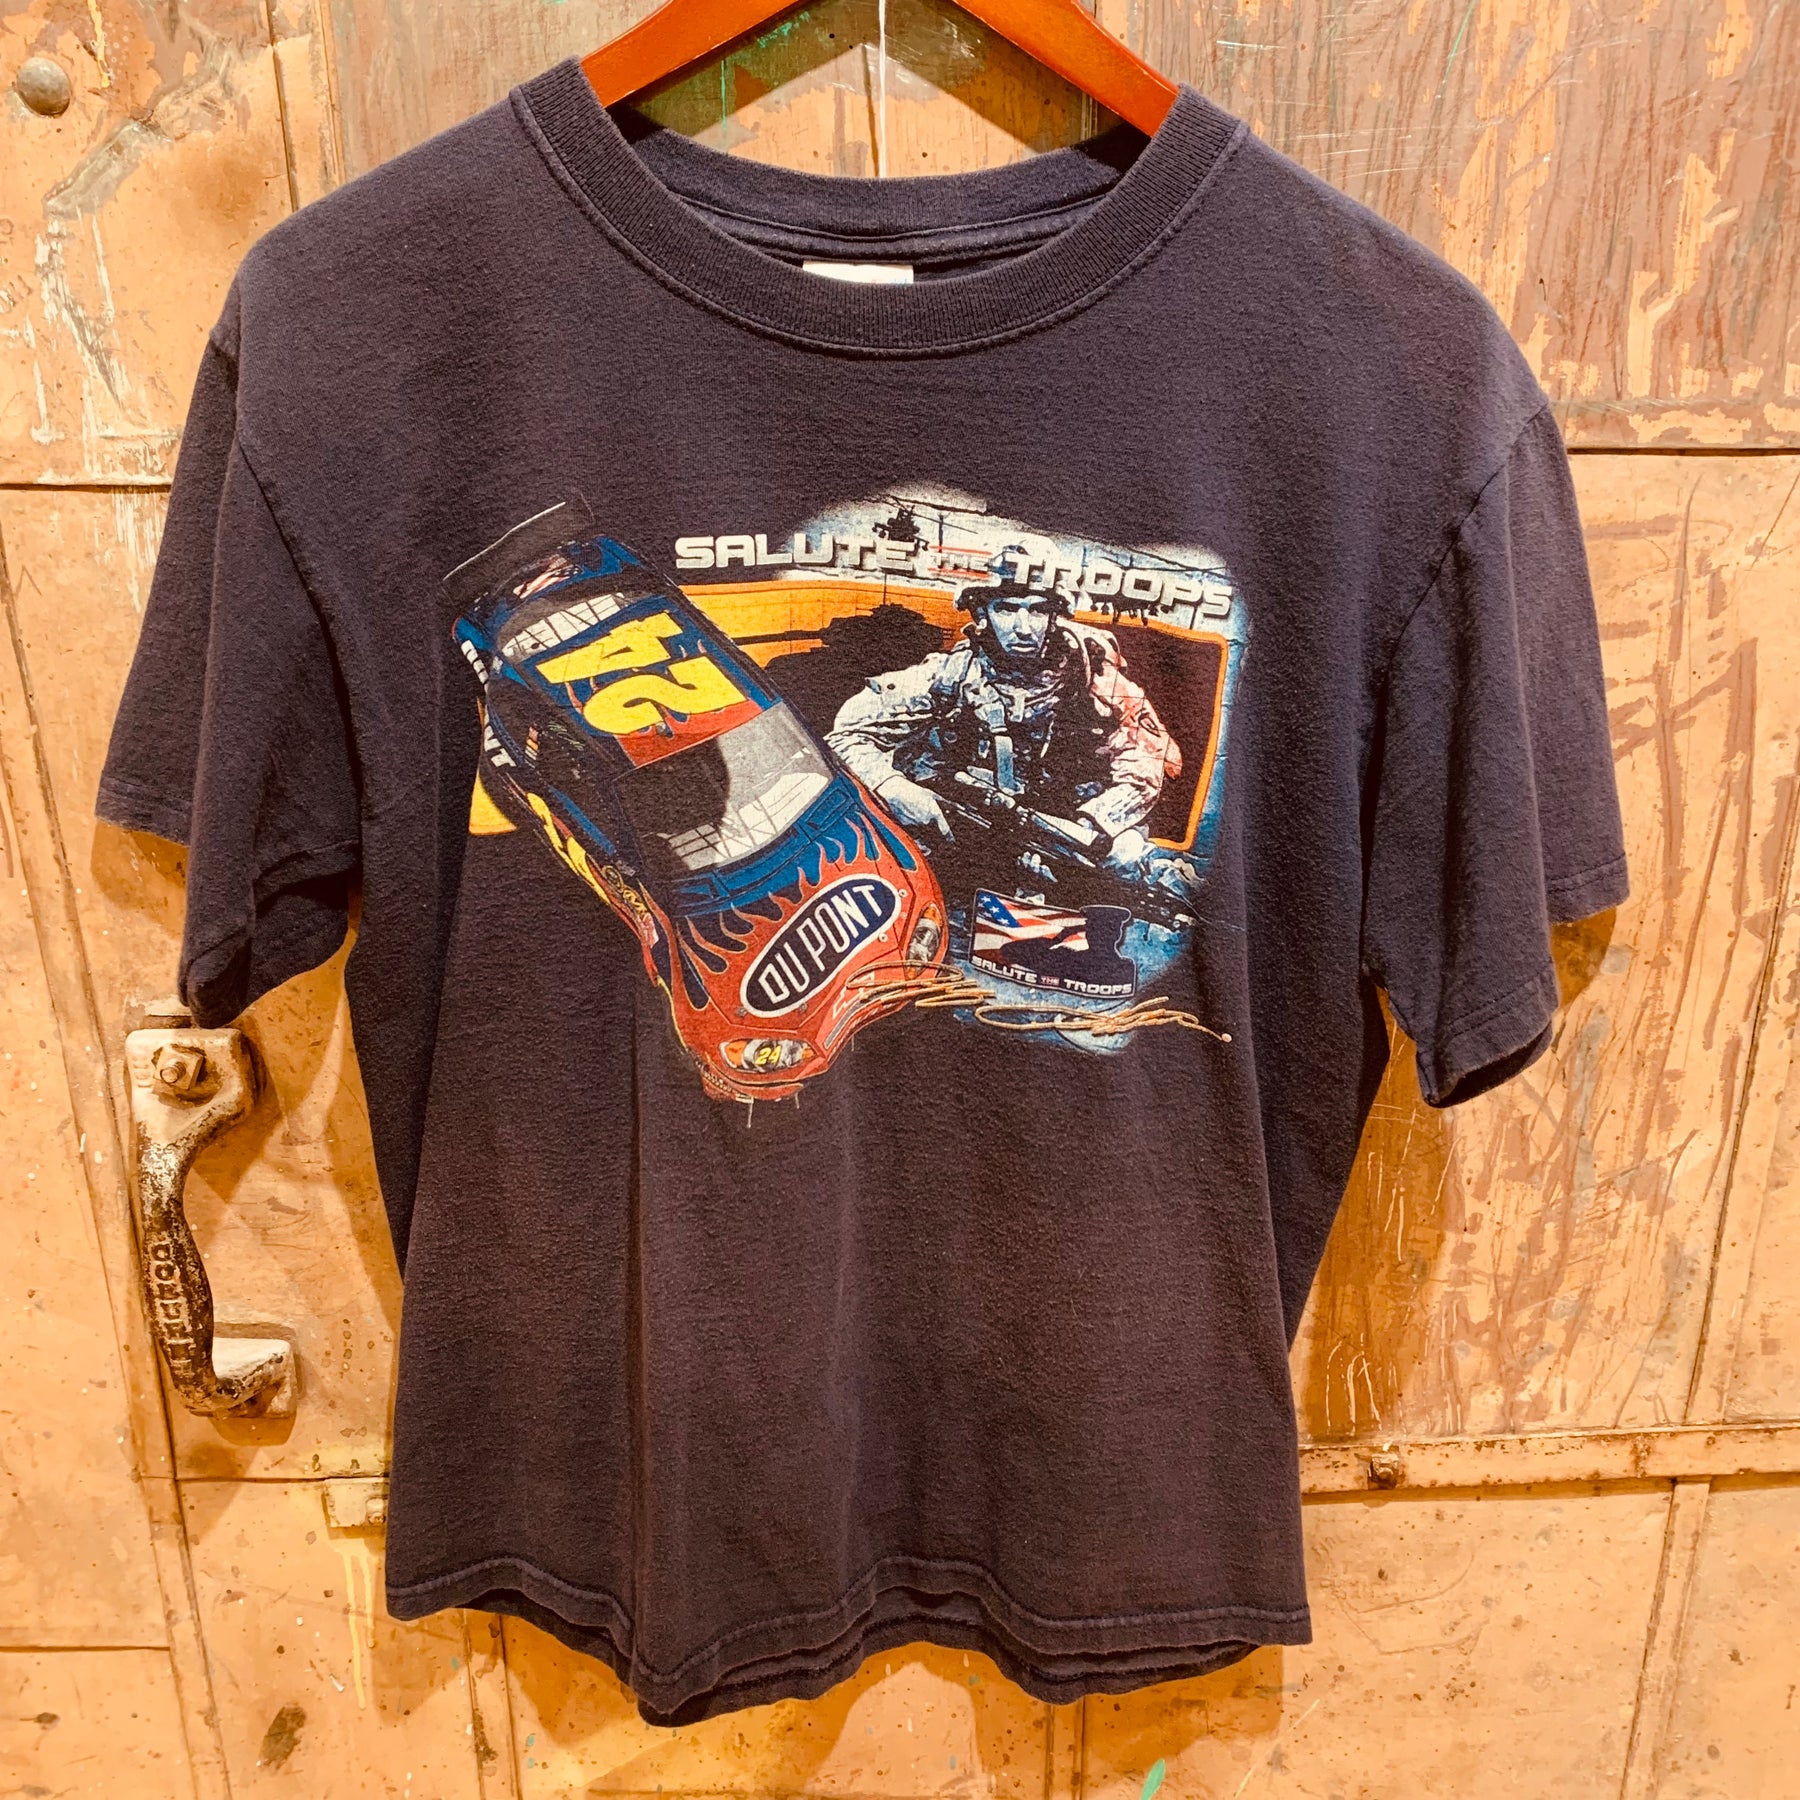 Support the Troops Racer Tee